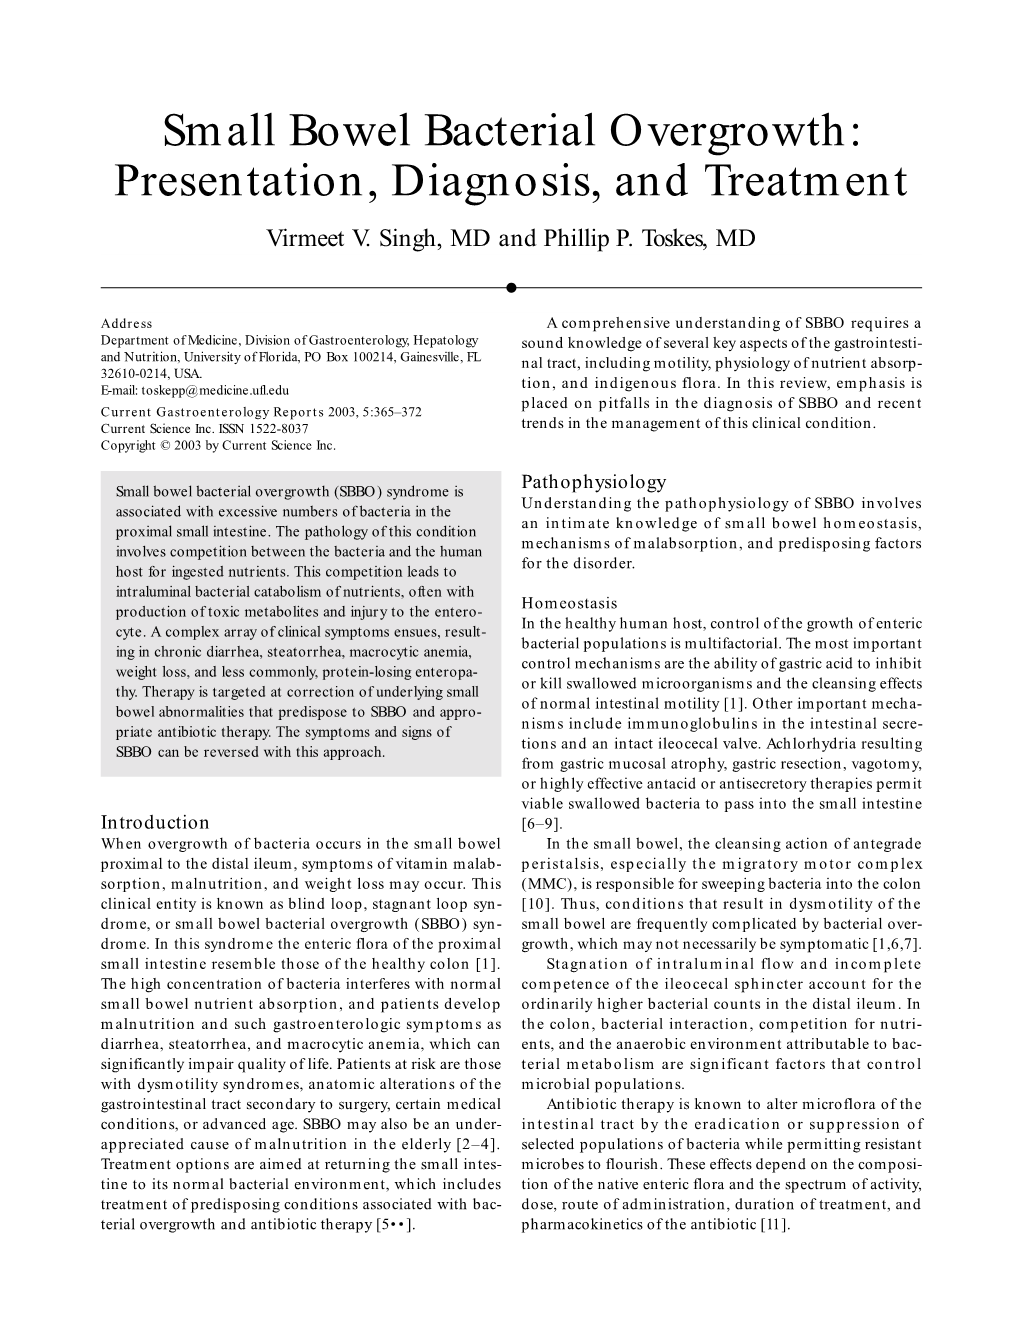 Small Bowel Bacterial Overgrowth: Presentation, Diagnosis, and Treatment Virmeet V